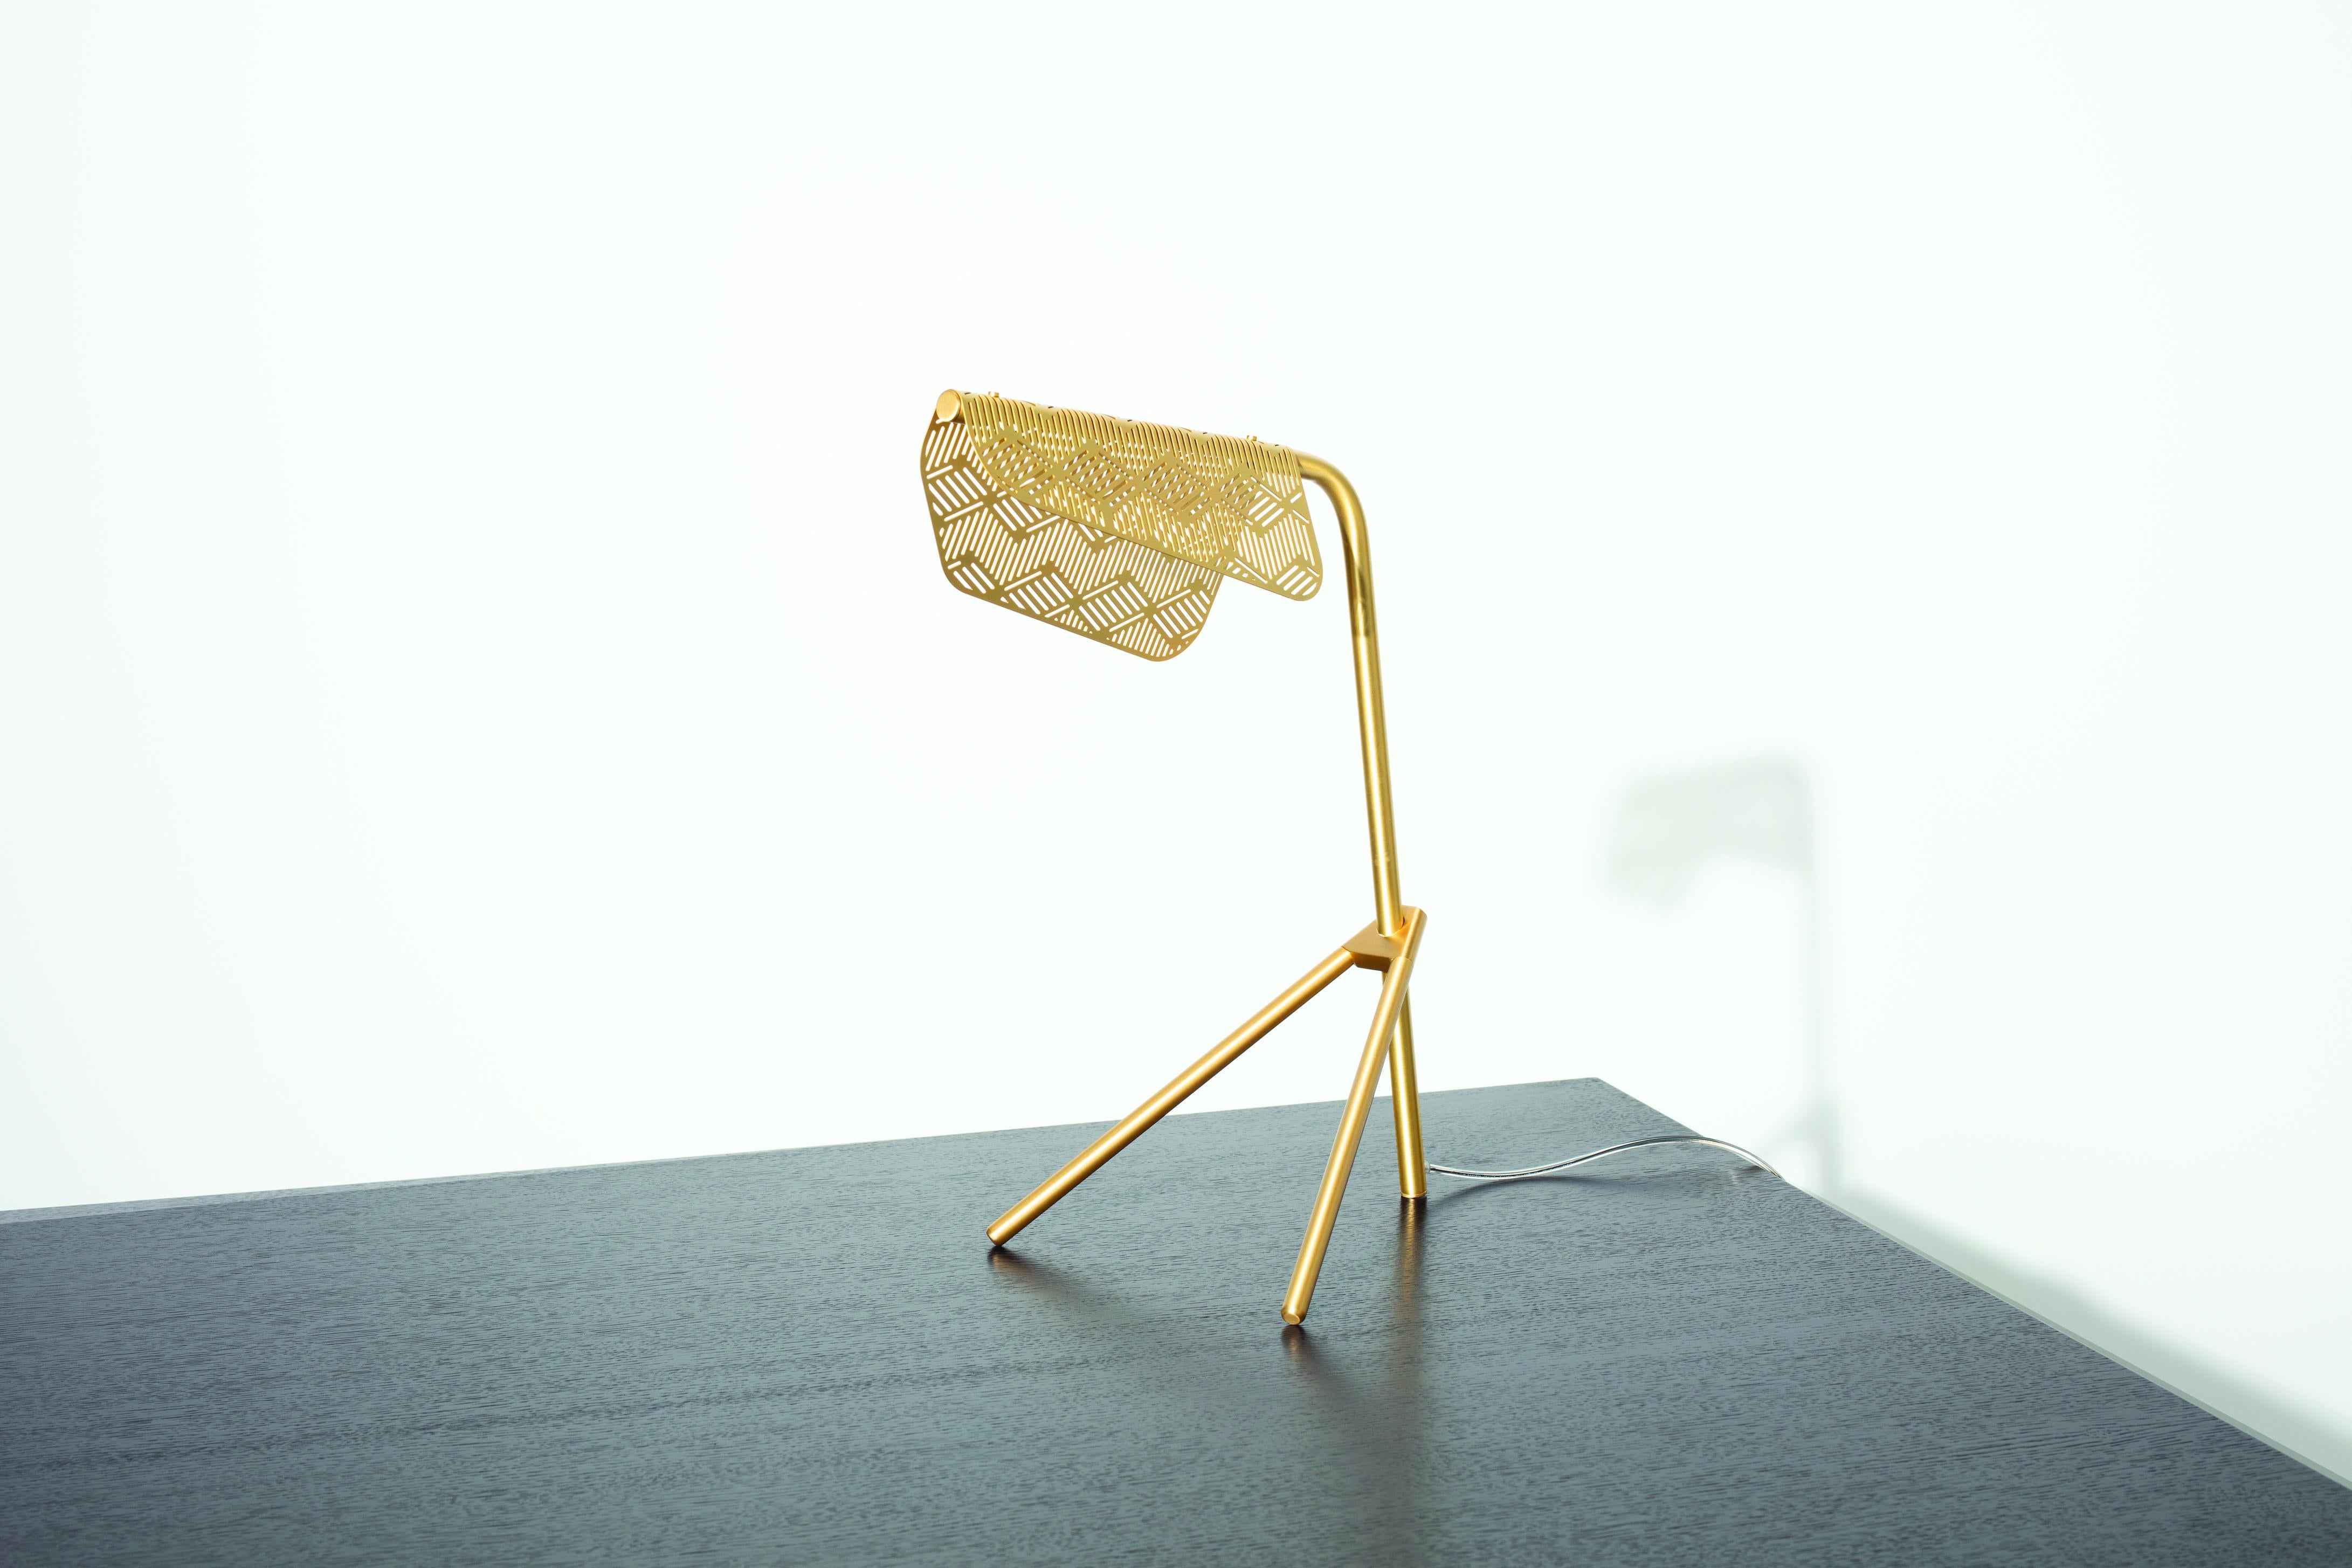 French Petite Friture Mediterranea Table Lamp in Brass by Noé Duchaufour-Lawrance, 2016 For Sale